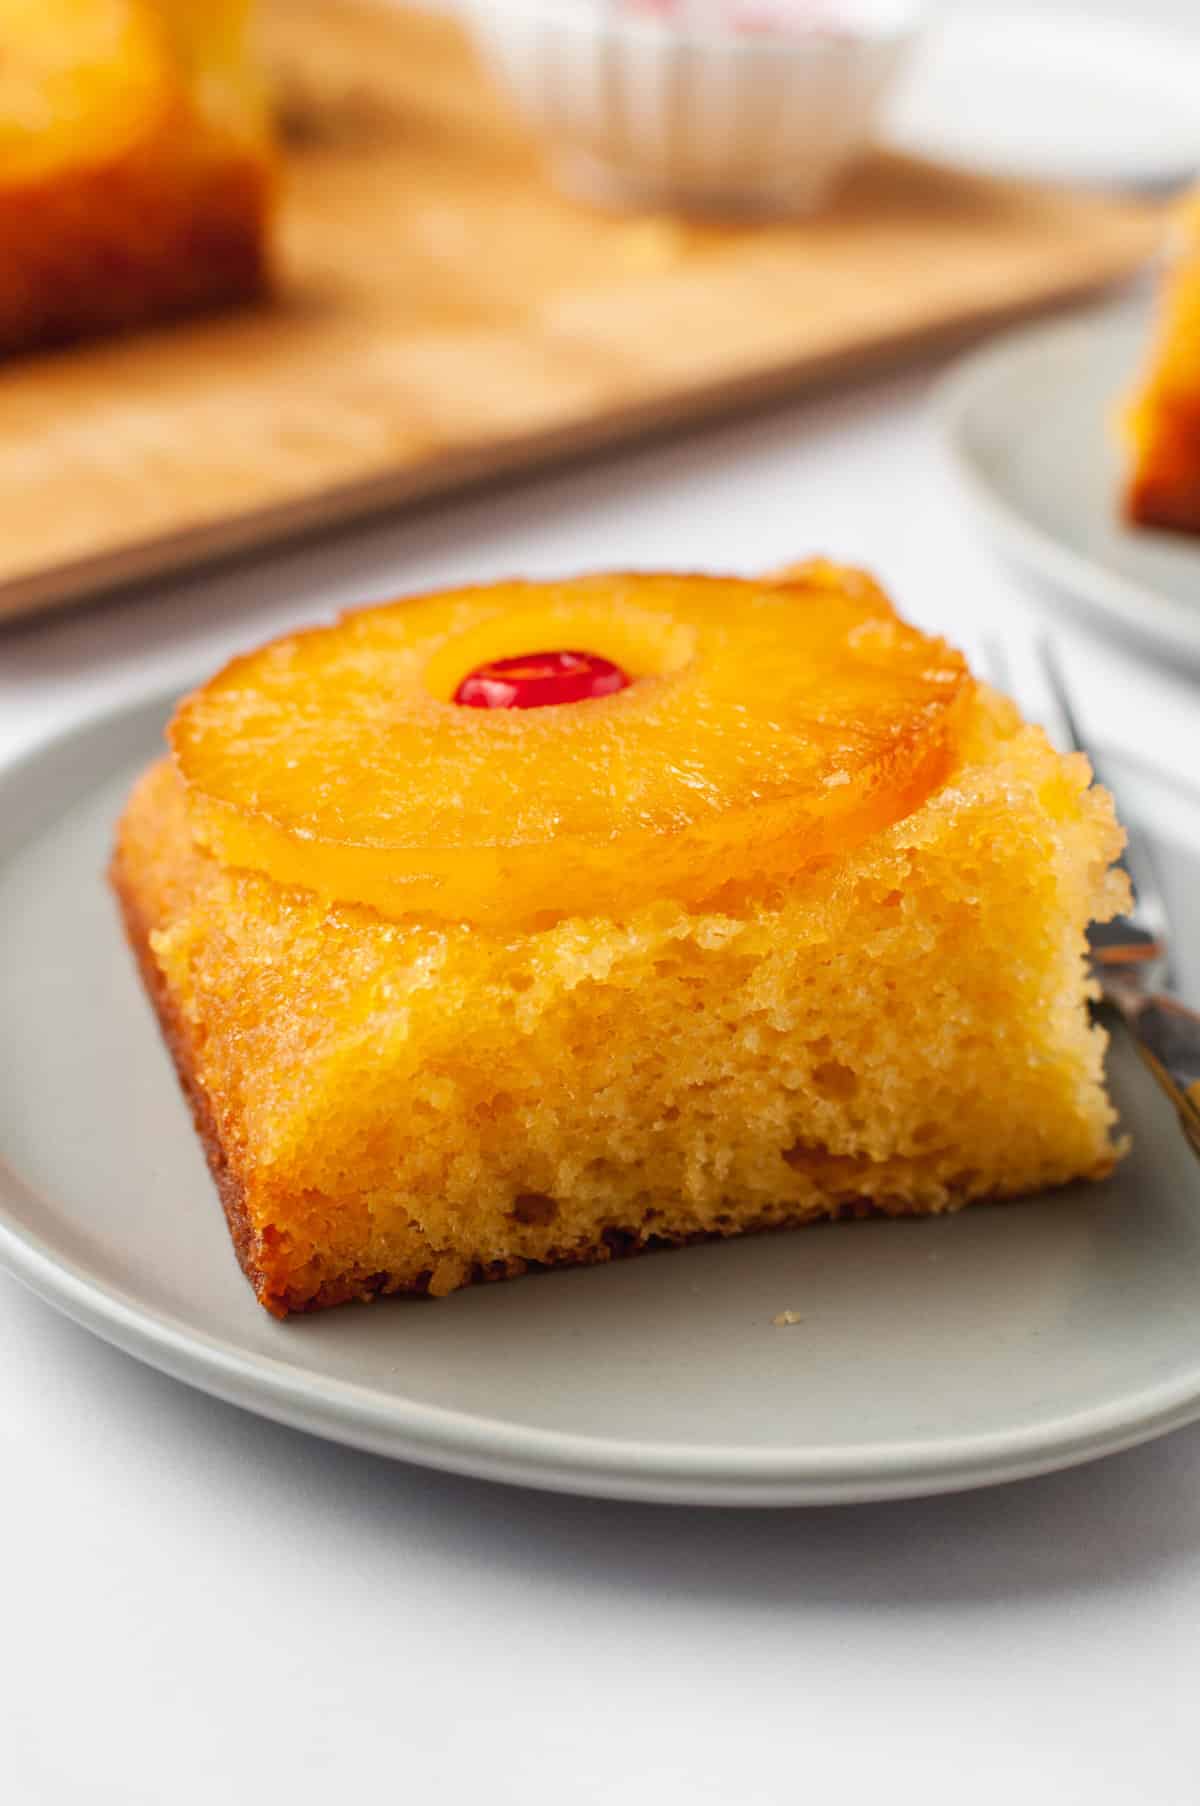 serving of pineapple upside down cake served on a grey plate with a silver fork